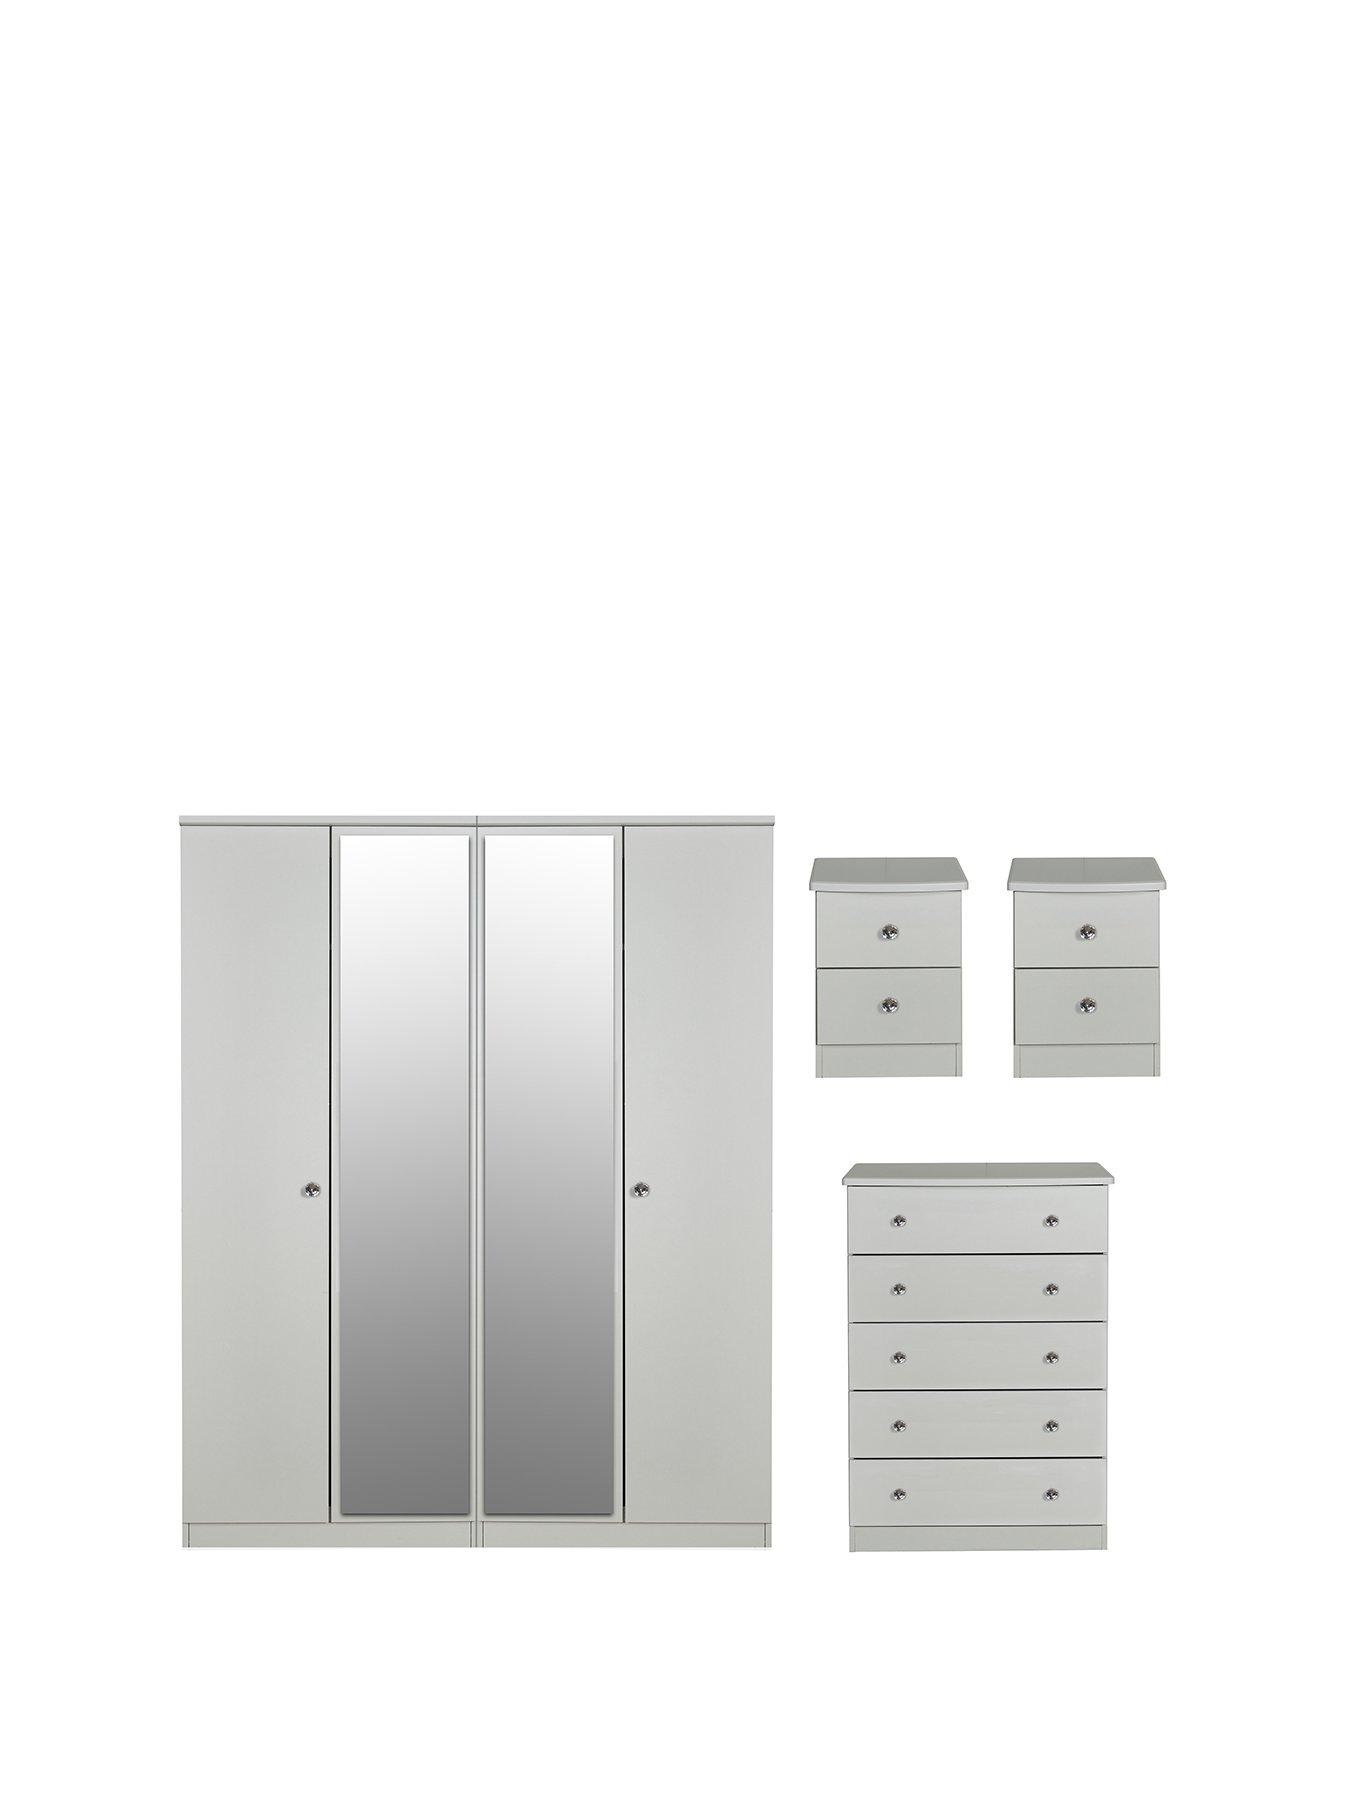 Details about   Playmobil furniture WHITE CABINET W/ GRAY TOP TWO GREEN DRAWERS 